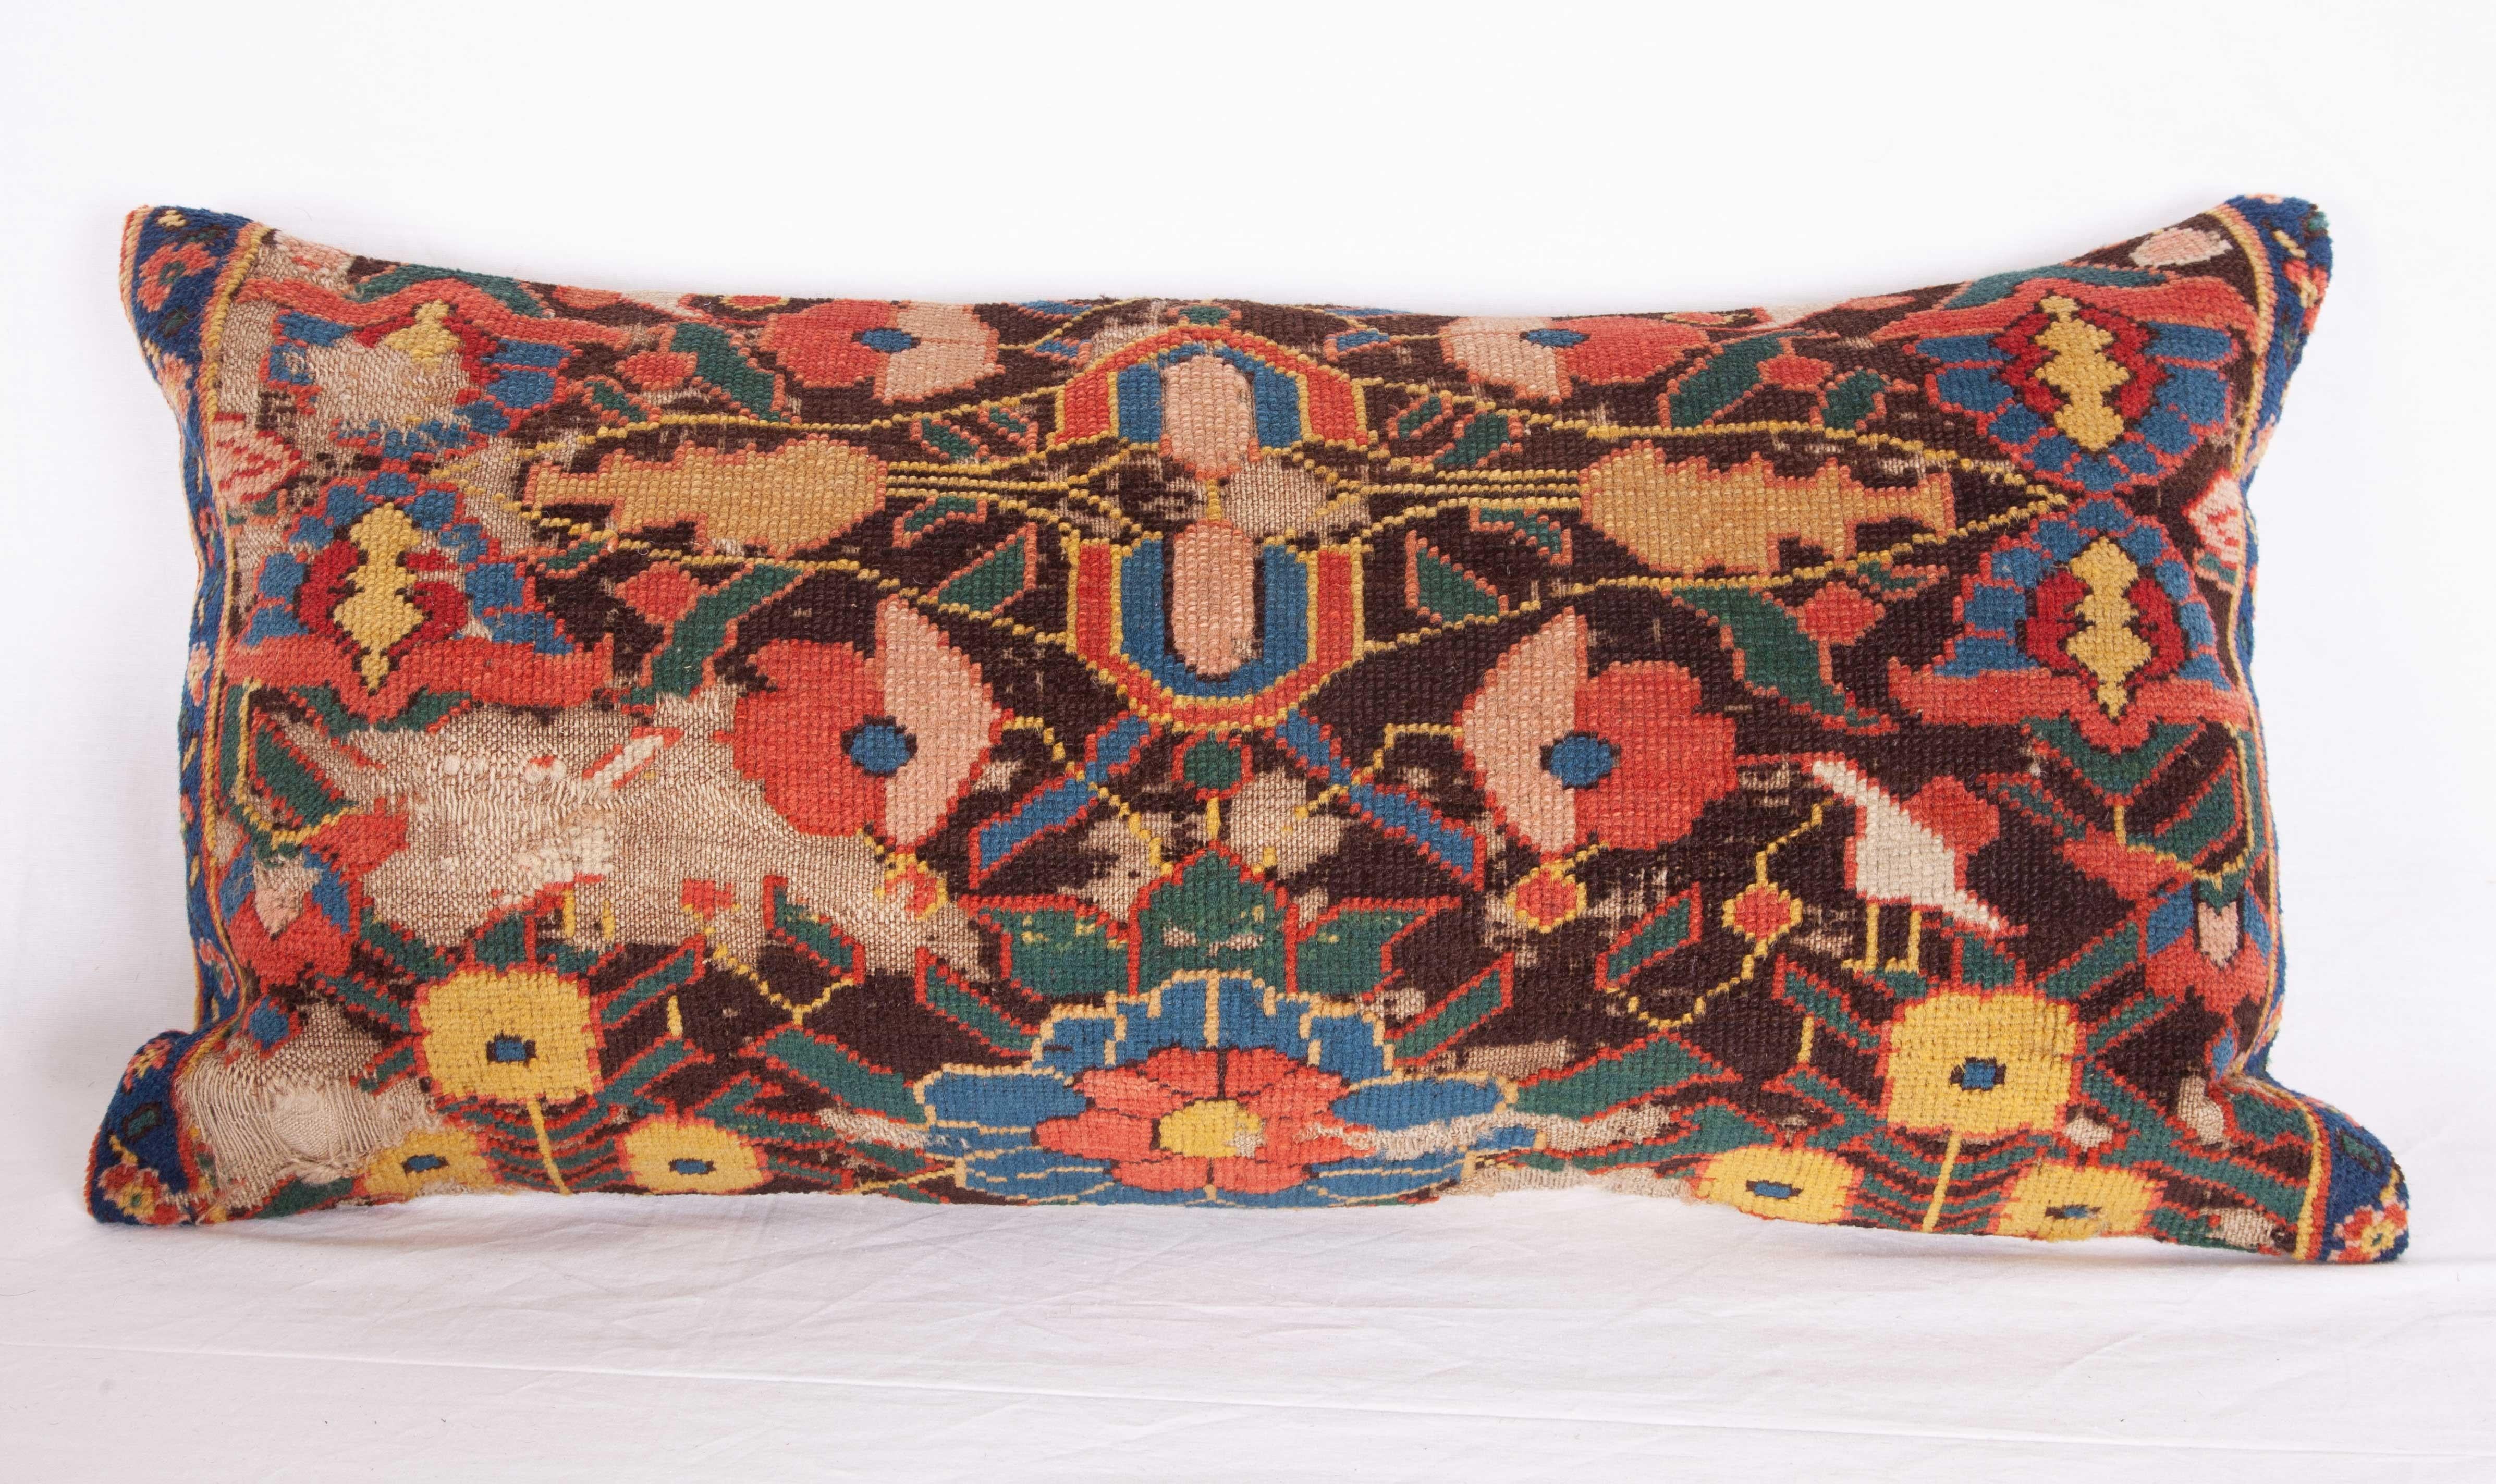 Hand-Woven Antique Rug Pillow Cases Fashioned from a 19th Century, Caucasian Kuba Rug